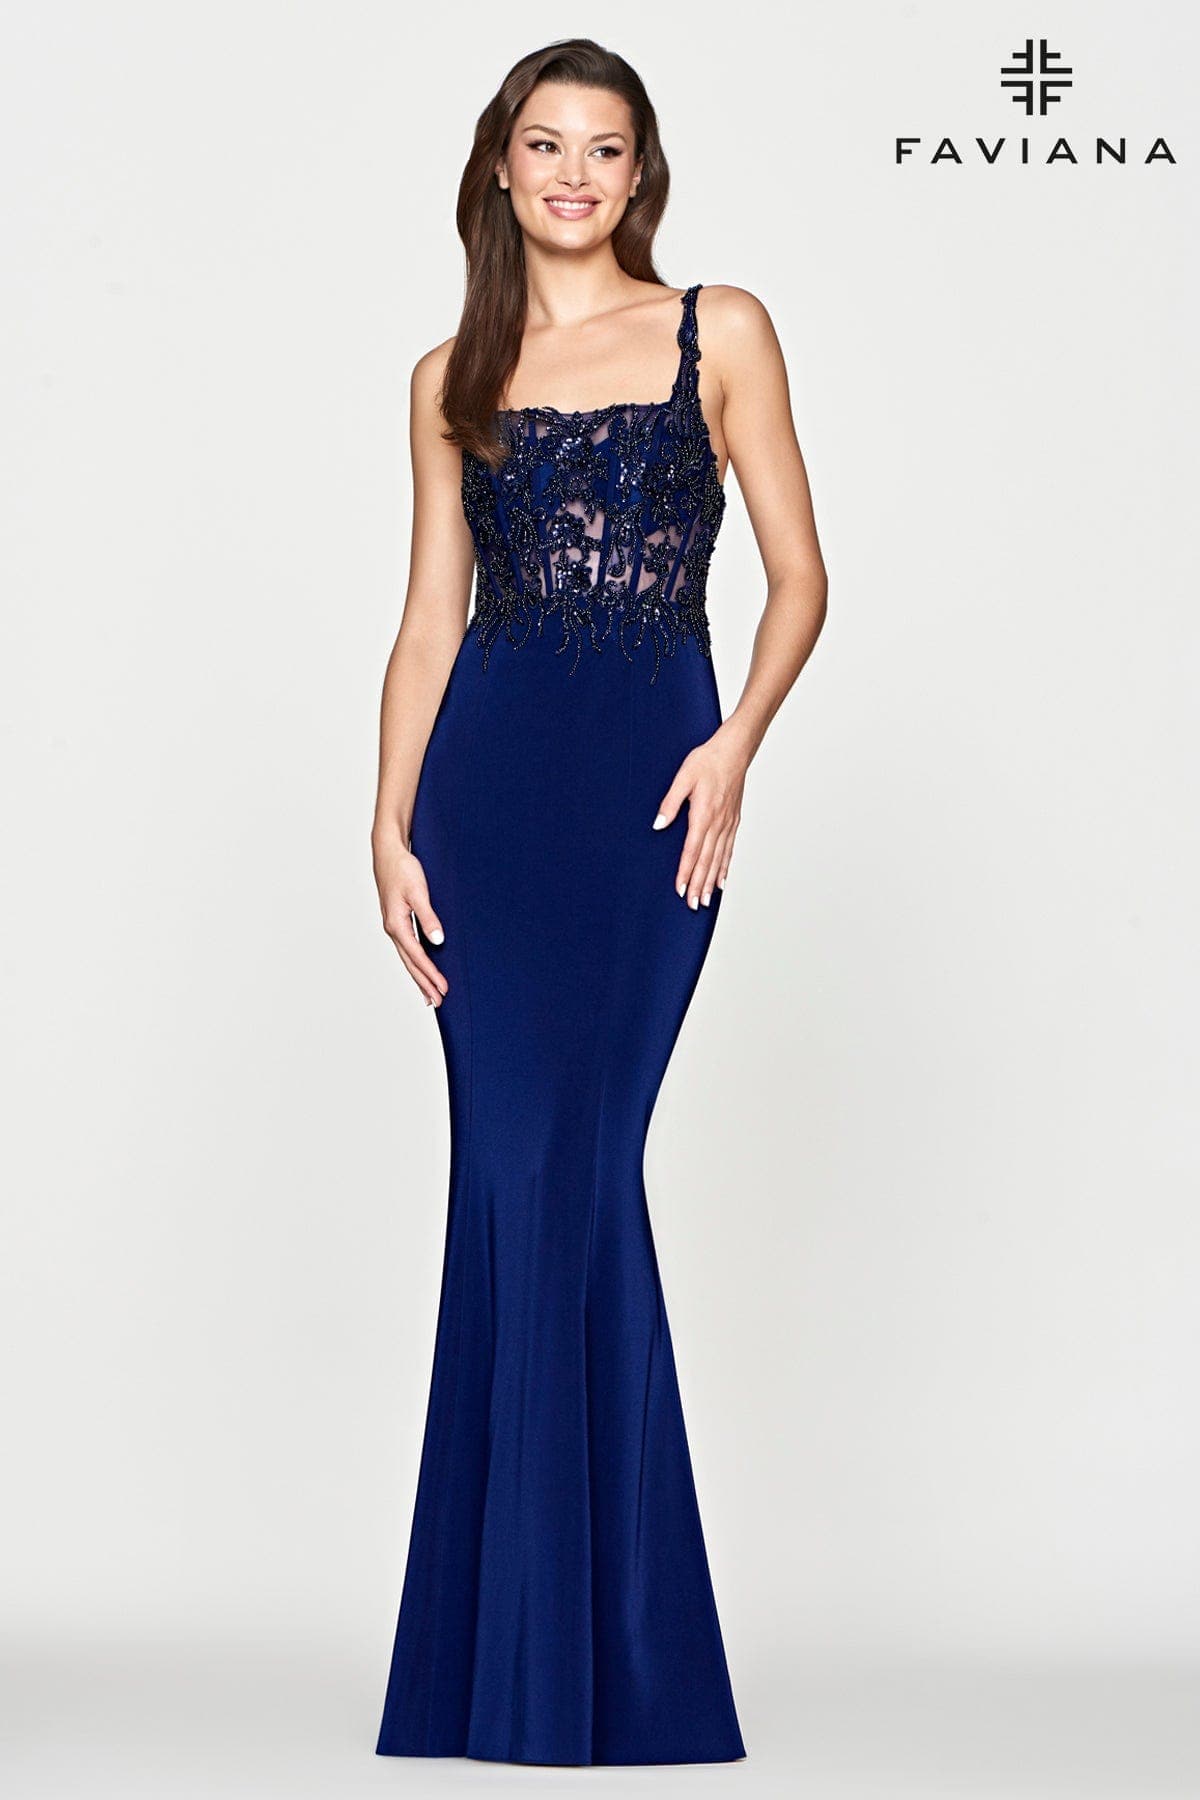 Corset Top Prom Dress With Beading